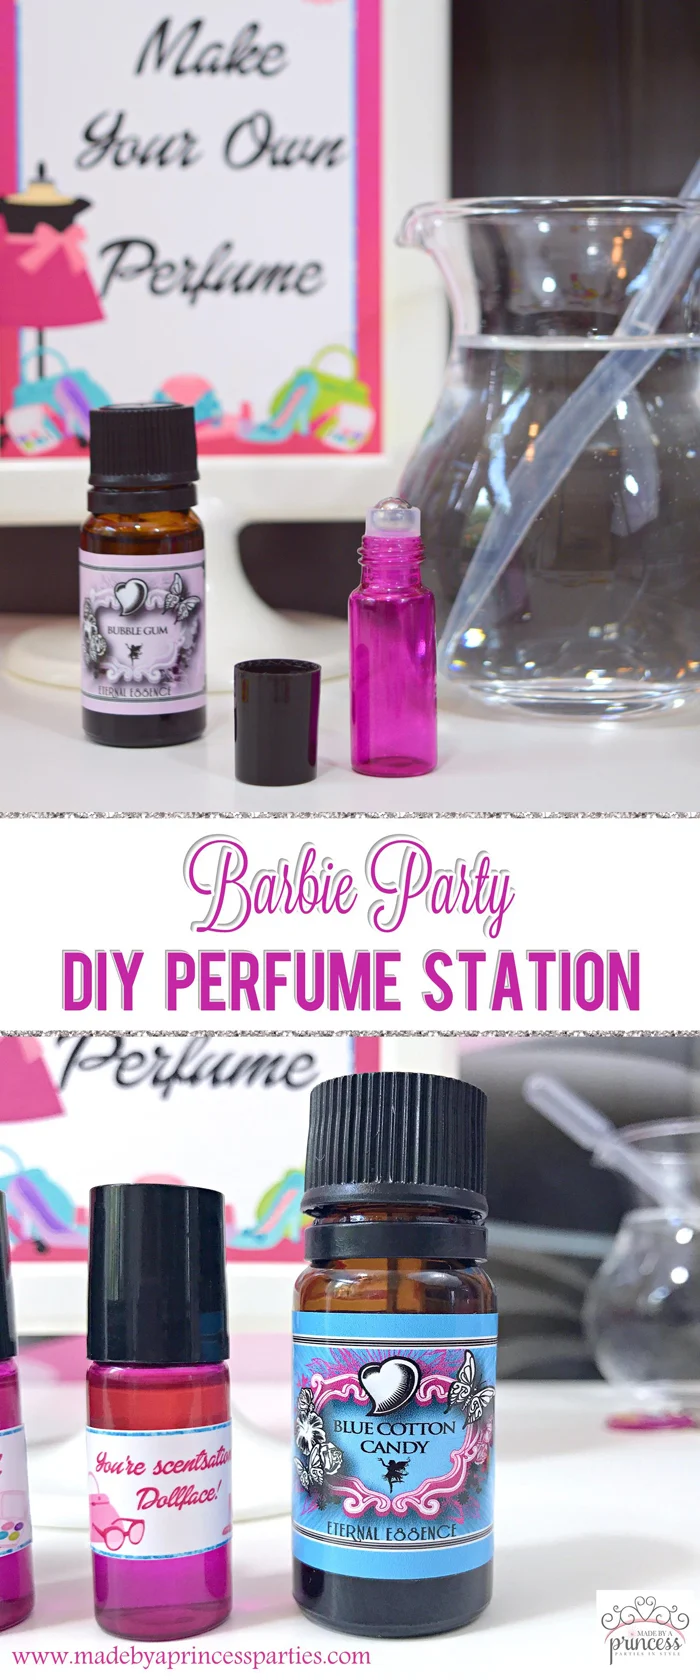 Barbie Party Perfume Station Barbie Pin It - Made by a Princess #barbie #barbieparty #DIYperfume